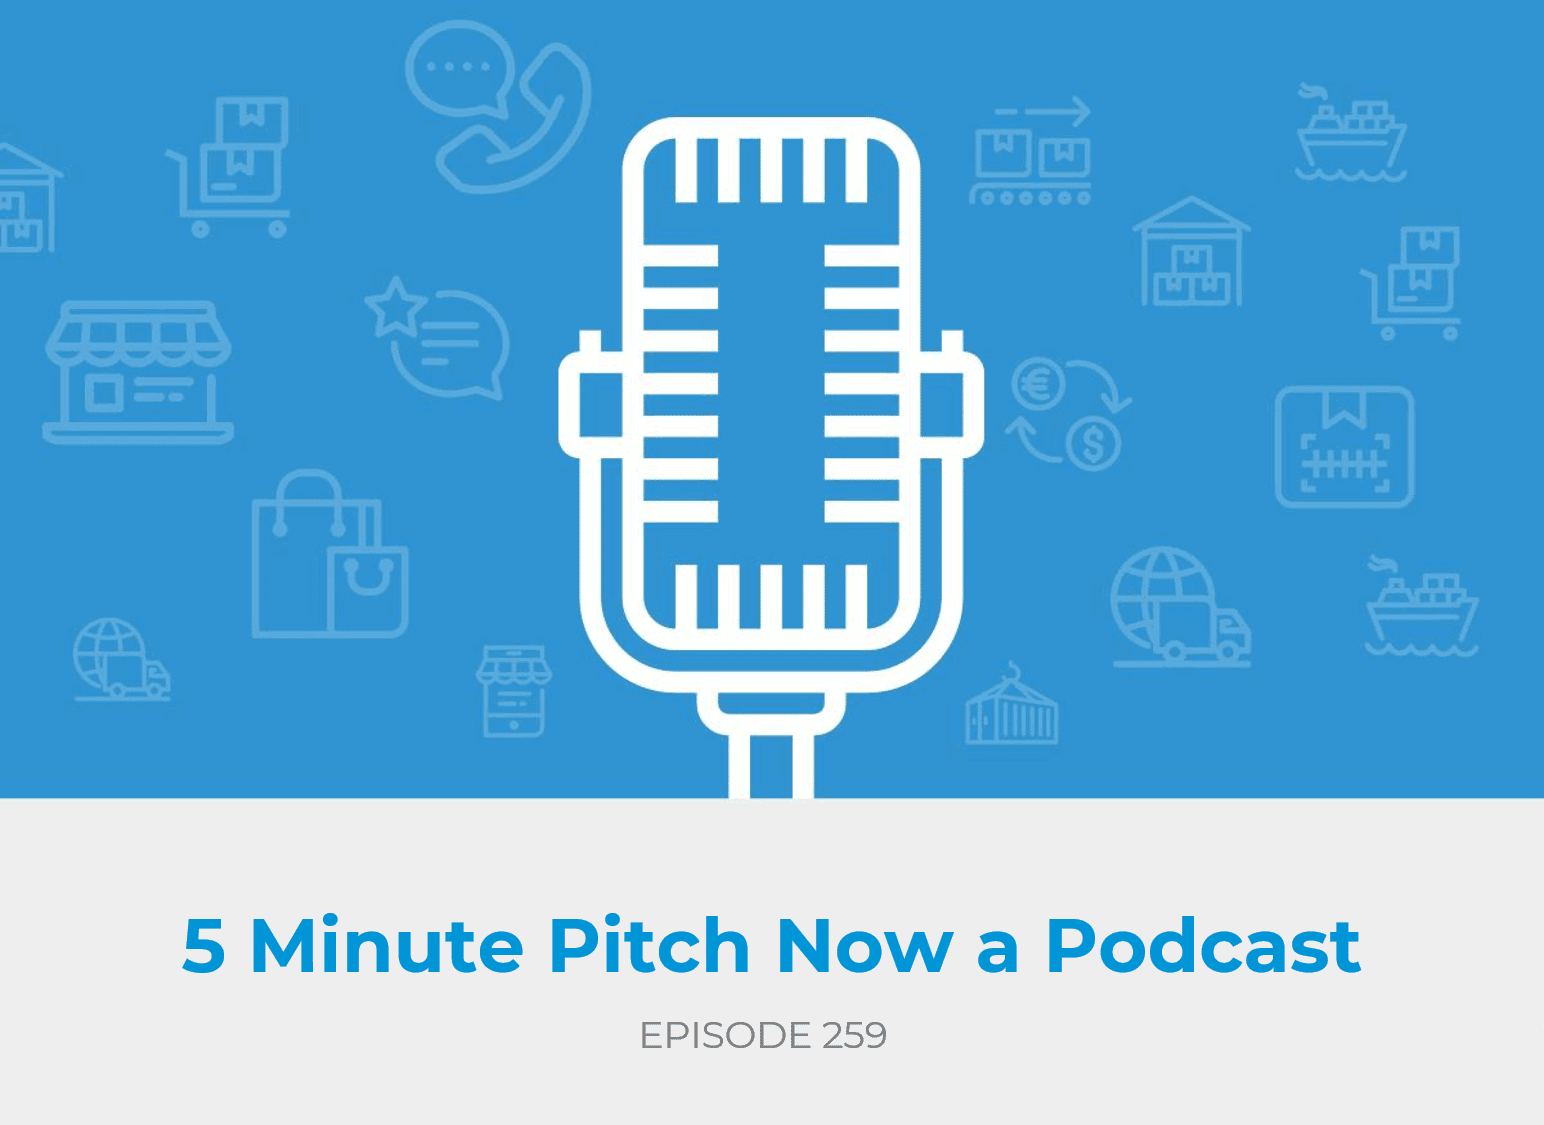 5 Minute Pitch Now a Podcast